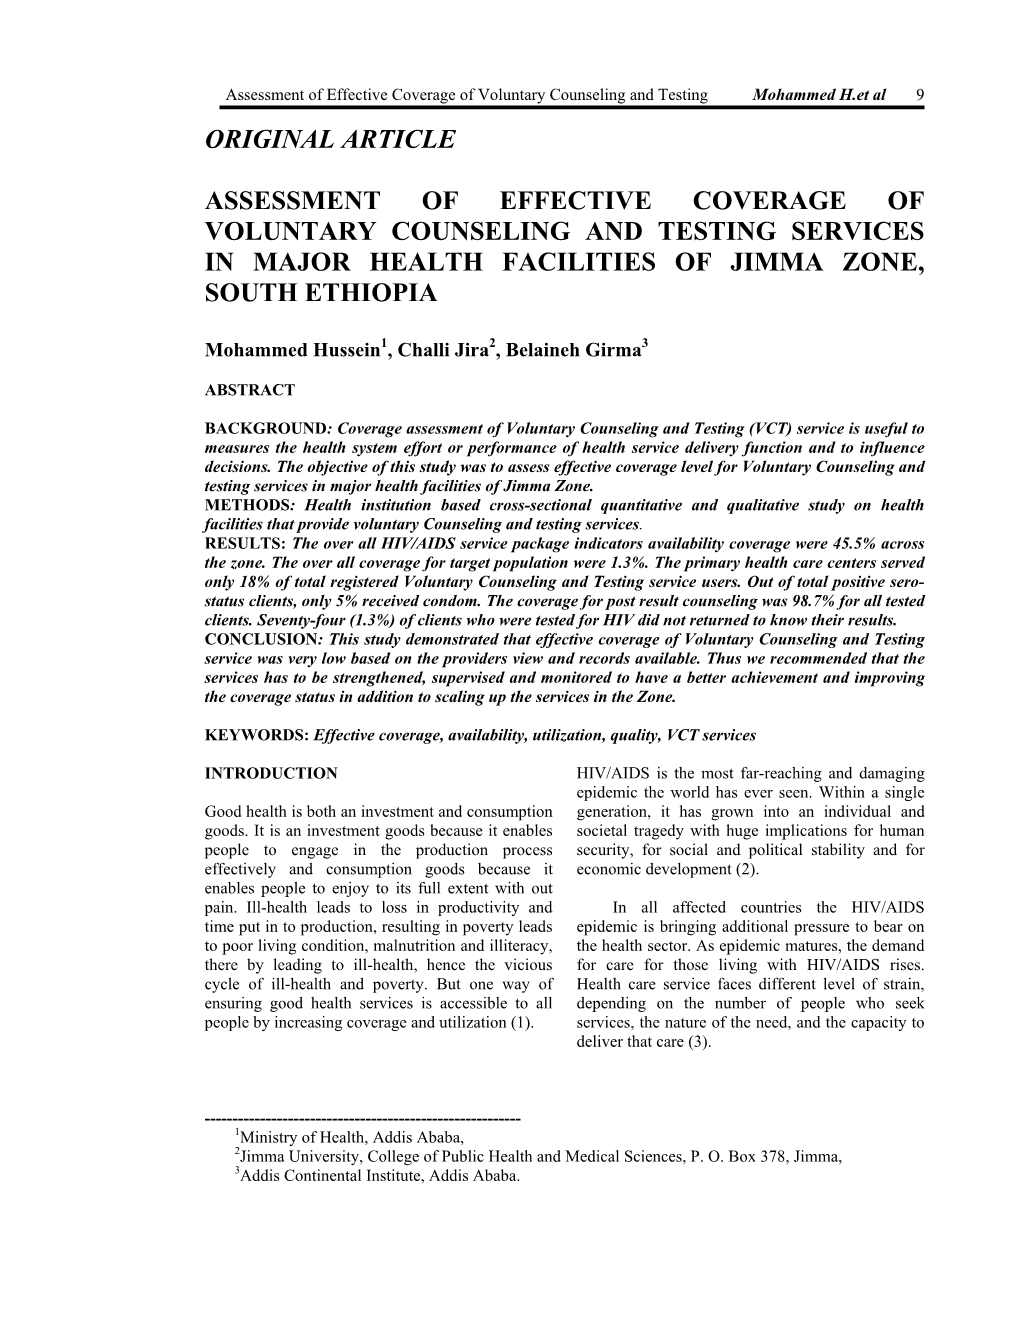 Original Article Assessment of Effective Coverage Of